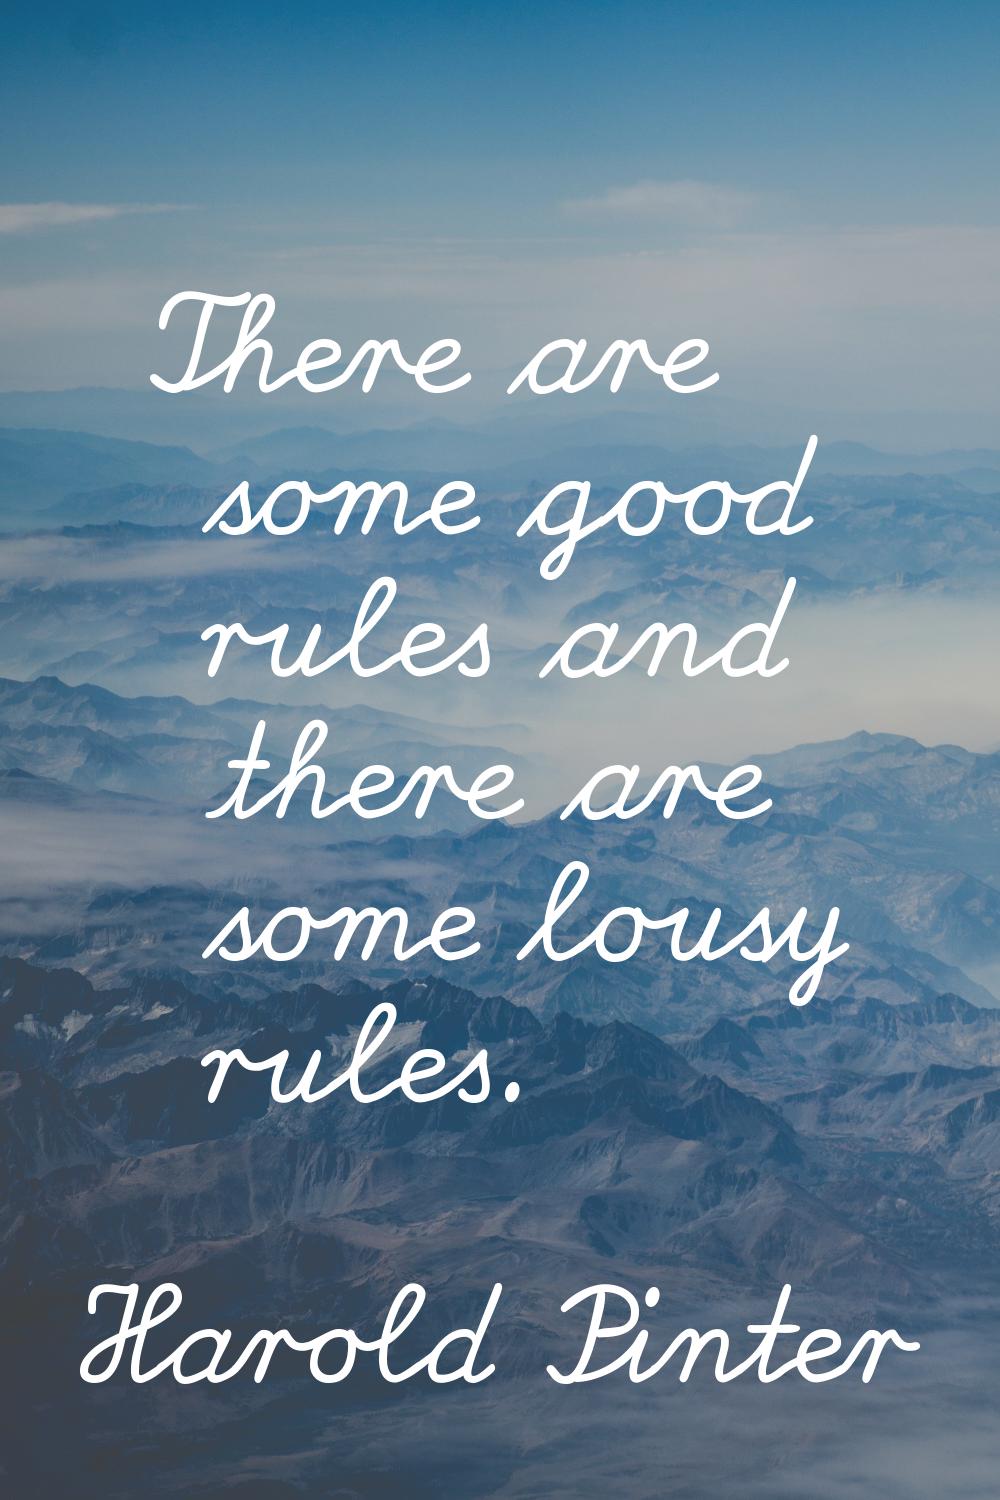 There are some good rules and there are some lousy rules.